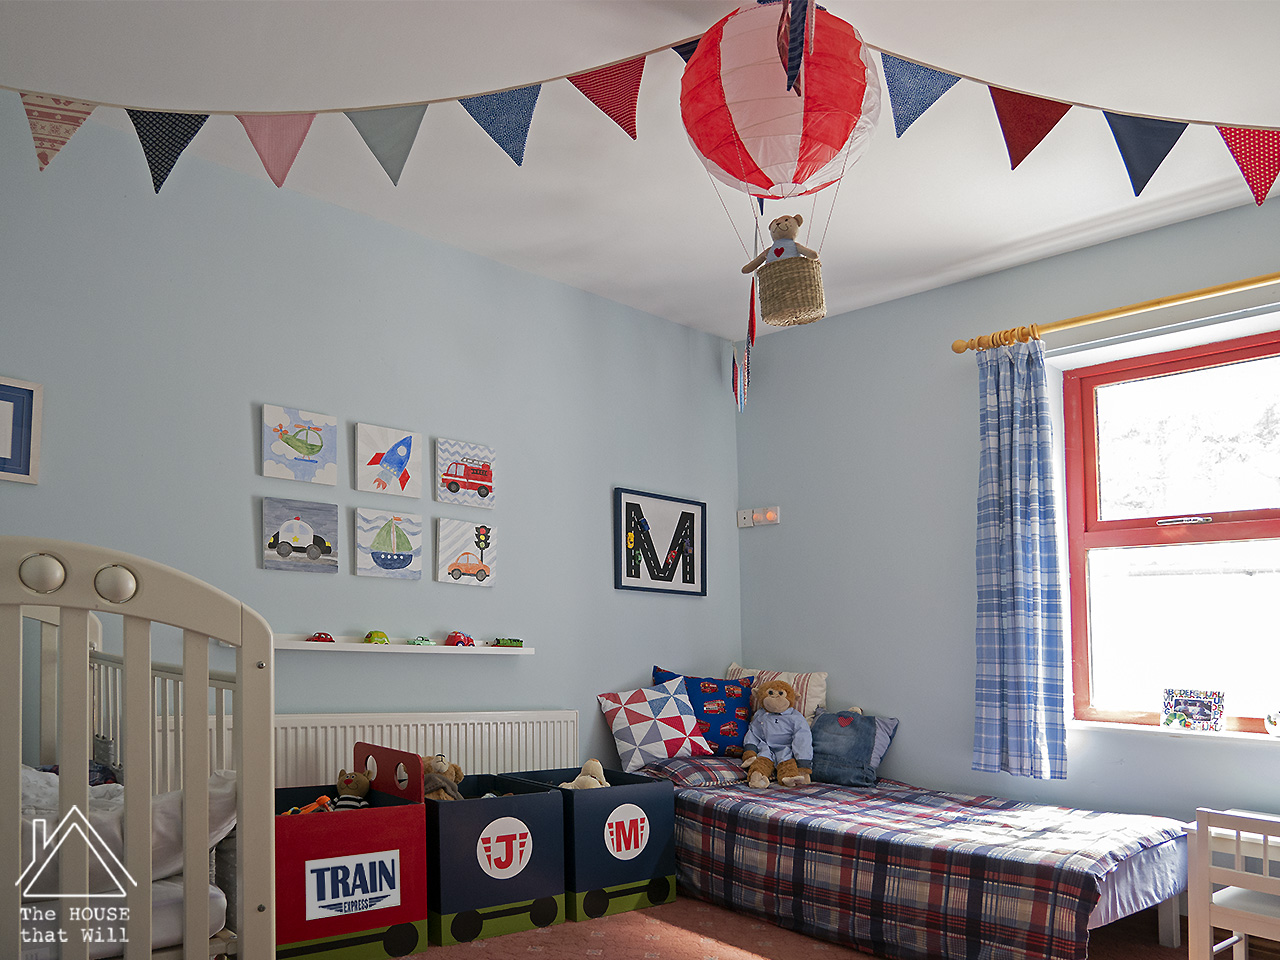 The House that Will | Budget Decor: €75 Boys' Bedroom decorating for kids